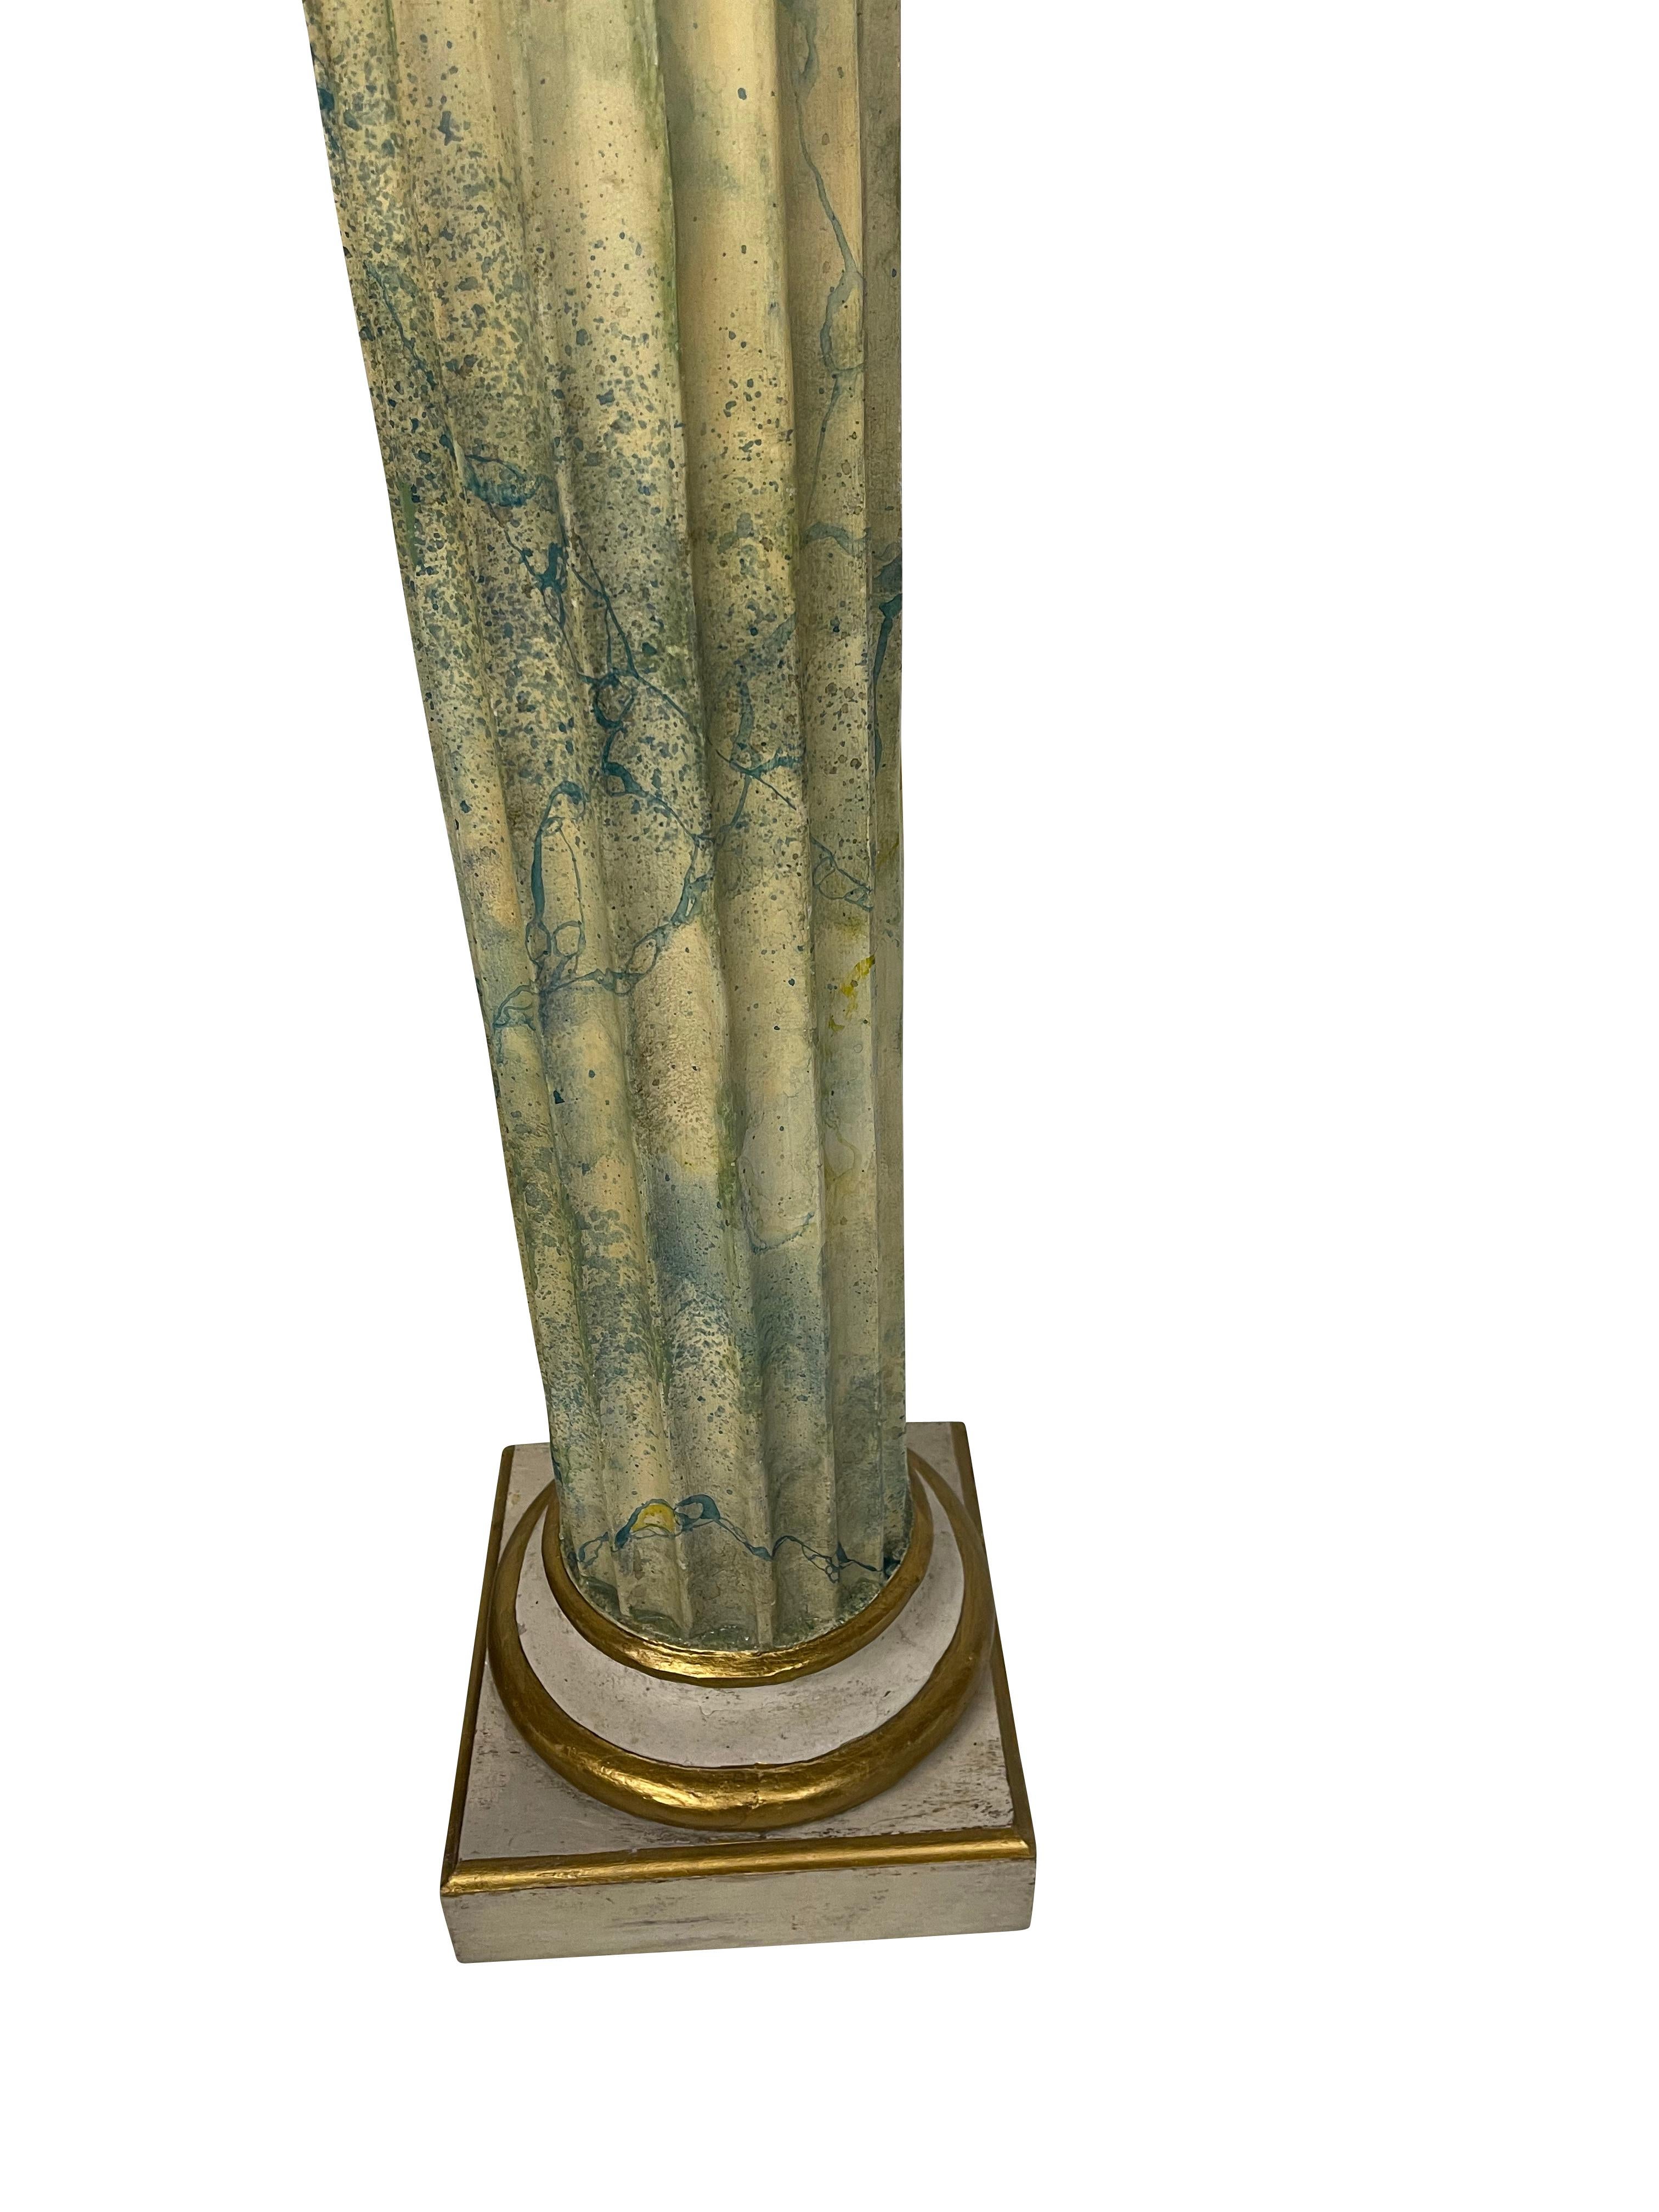 Hand-Crafted Pair of Neoclassical Painted Green/ Blue Urns and Stands with Faux Marble